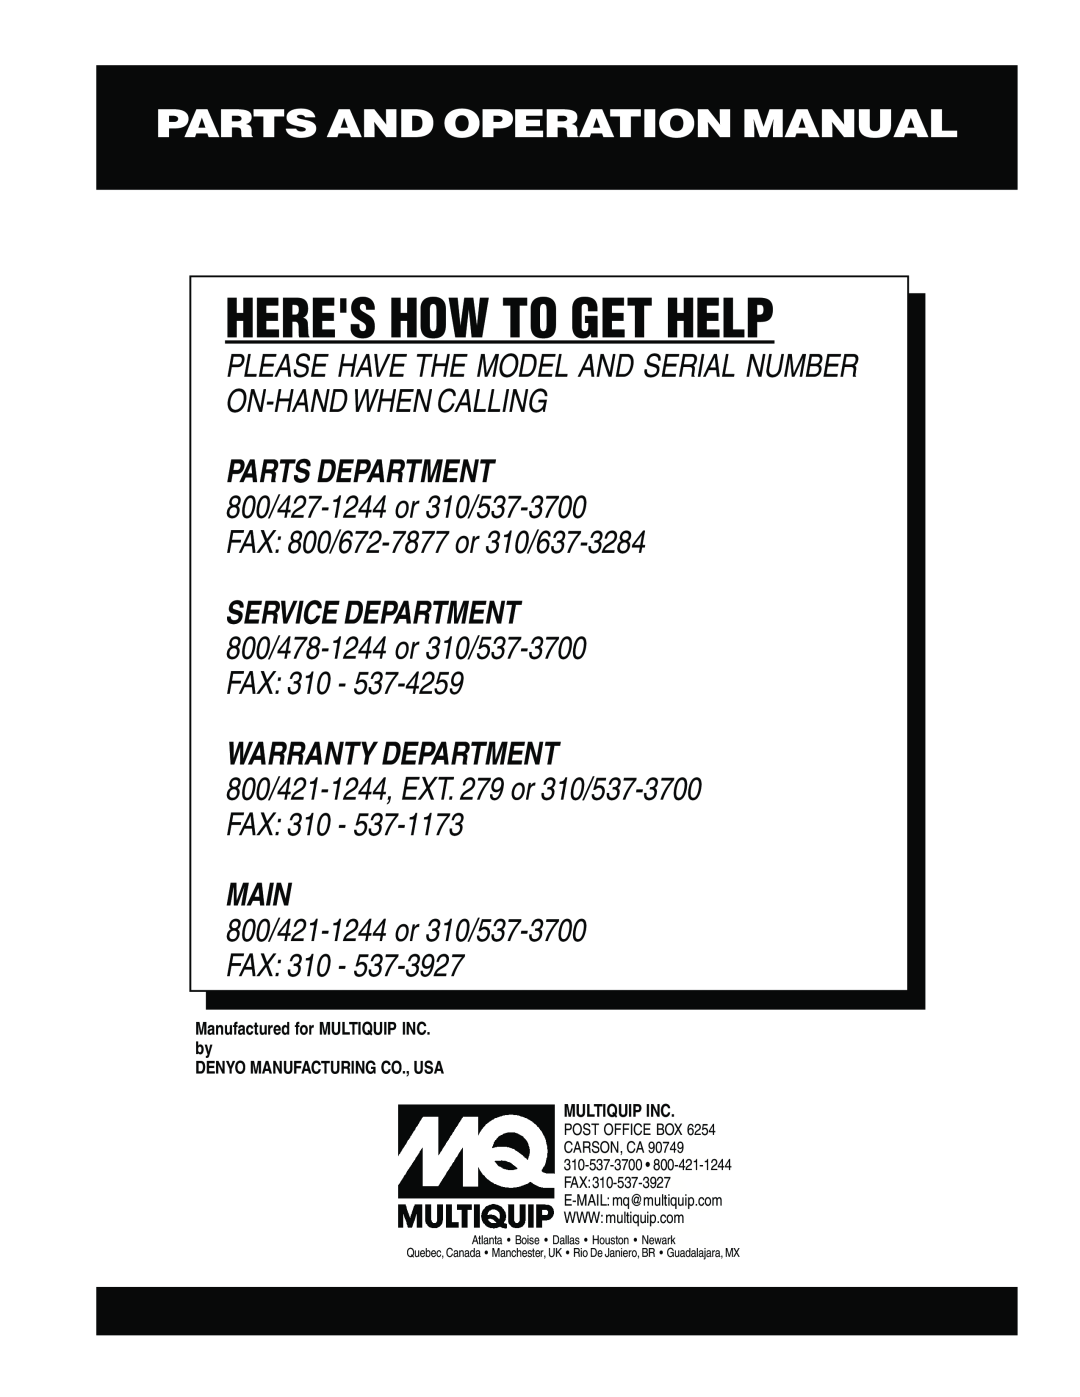 Multiquip GA-9.7 HZ 800/421-1244or 310/537-3700FAX: 310, Heres How To Get Help, Parts And Operation Manual, Main 